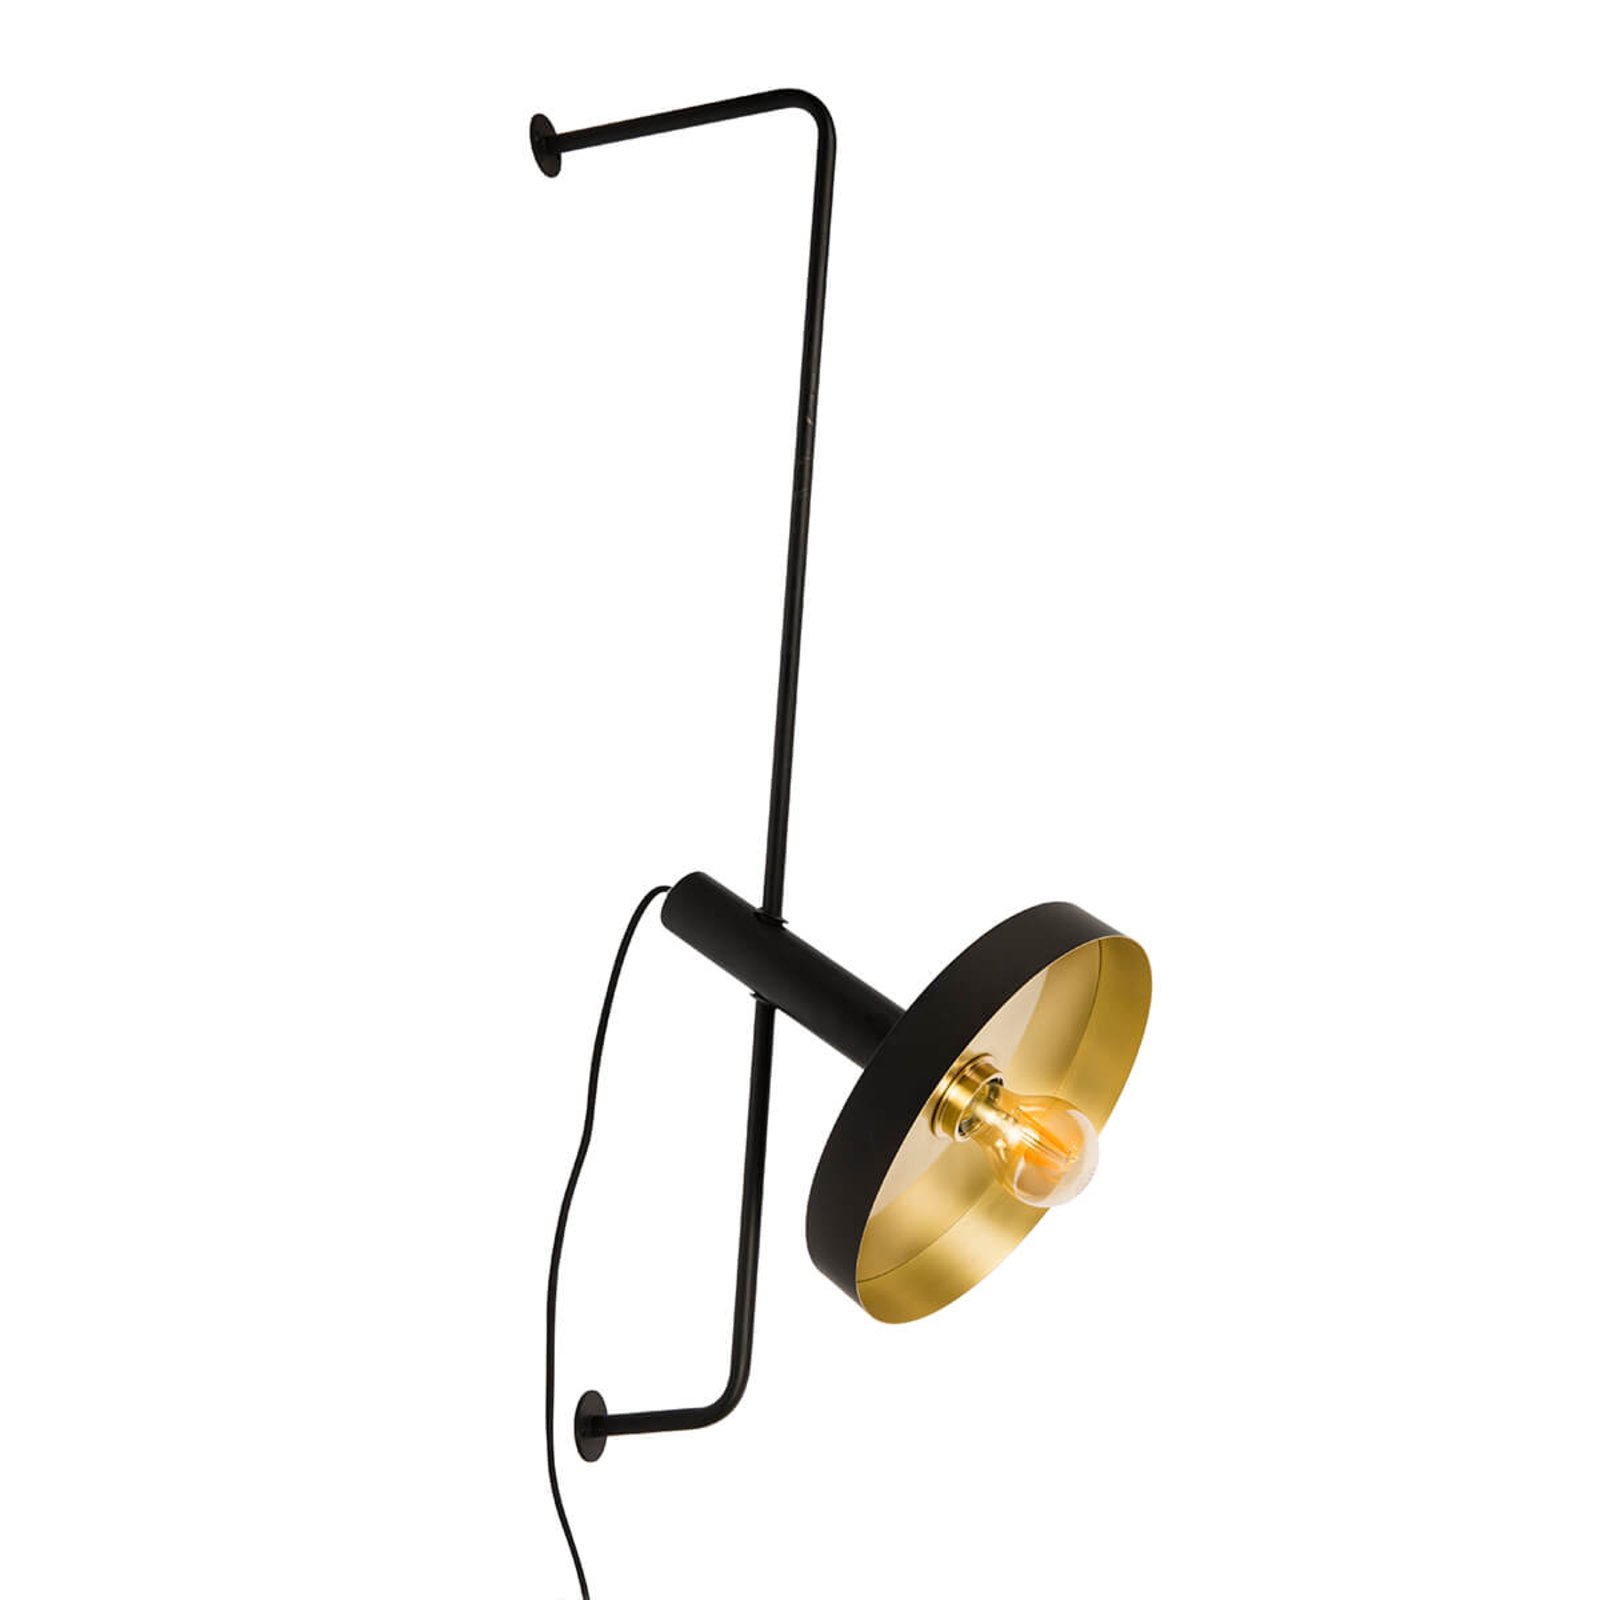 Special Whizz wall light, black